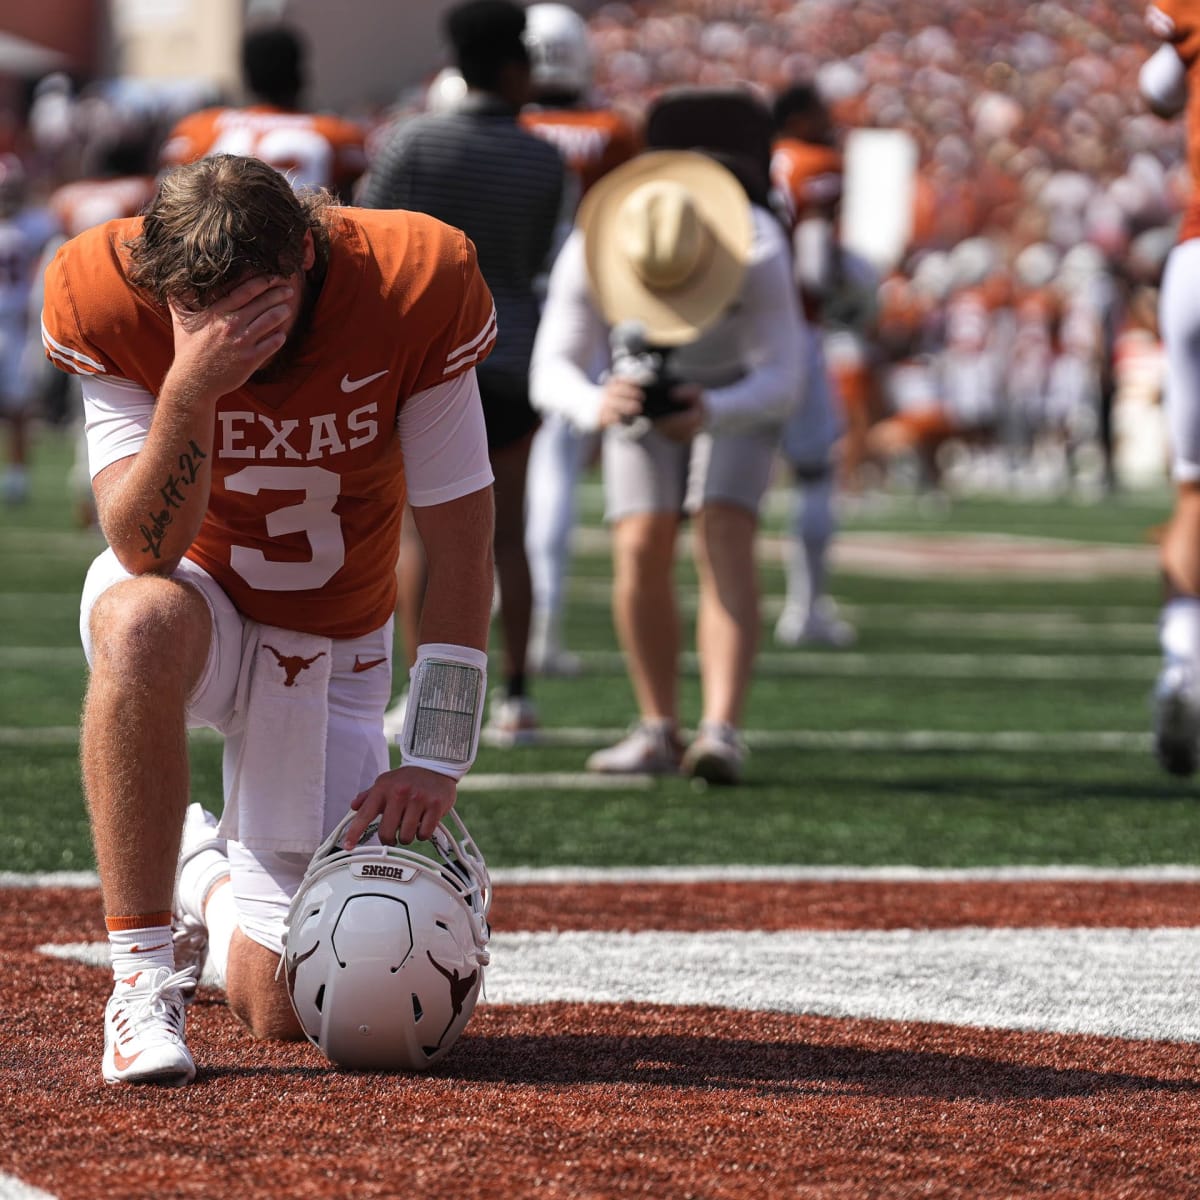 Jersey Numbers of Texas Longhorns Football Newcomers Quinn Ewers and Others  Revealed - Sports Illustrated Texas Longhorns News, Analysis and More